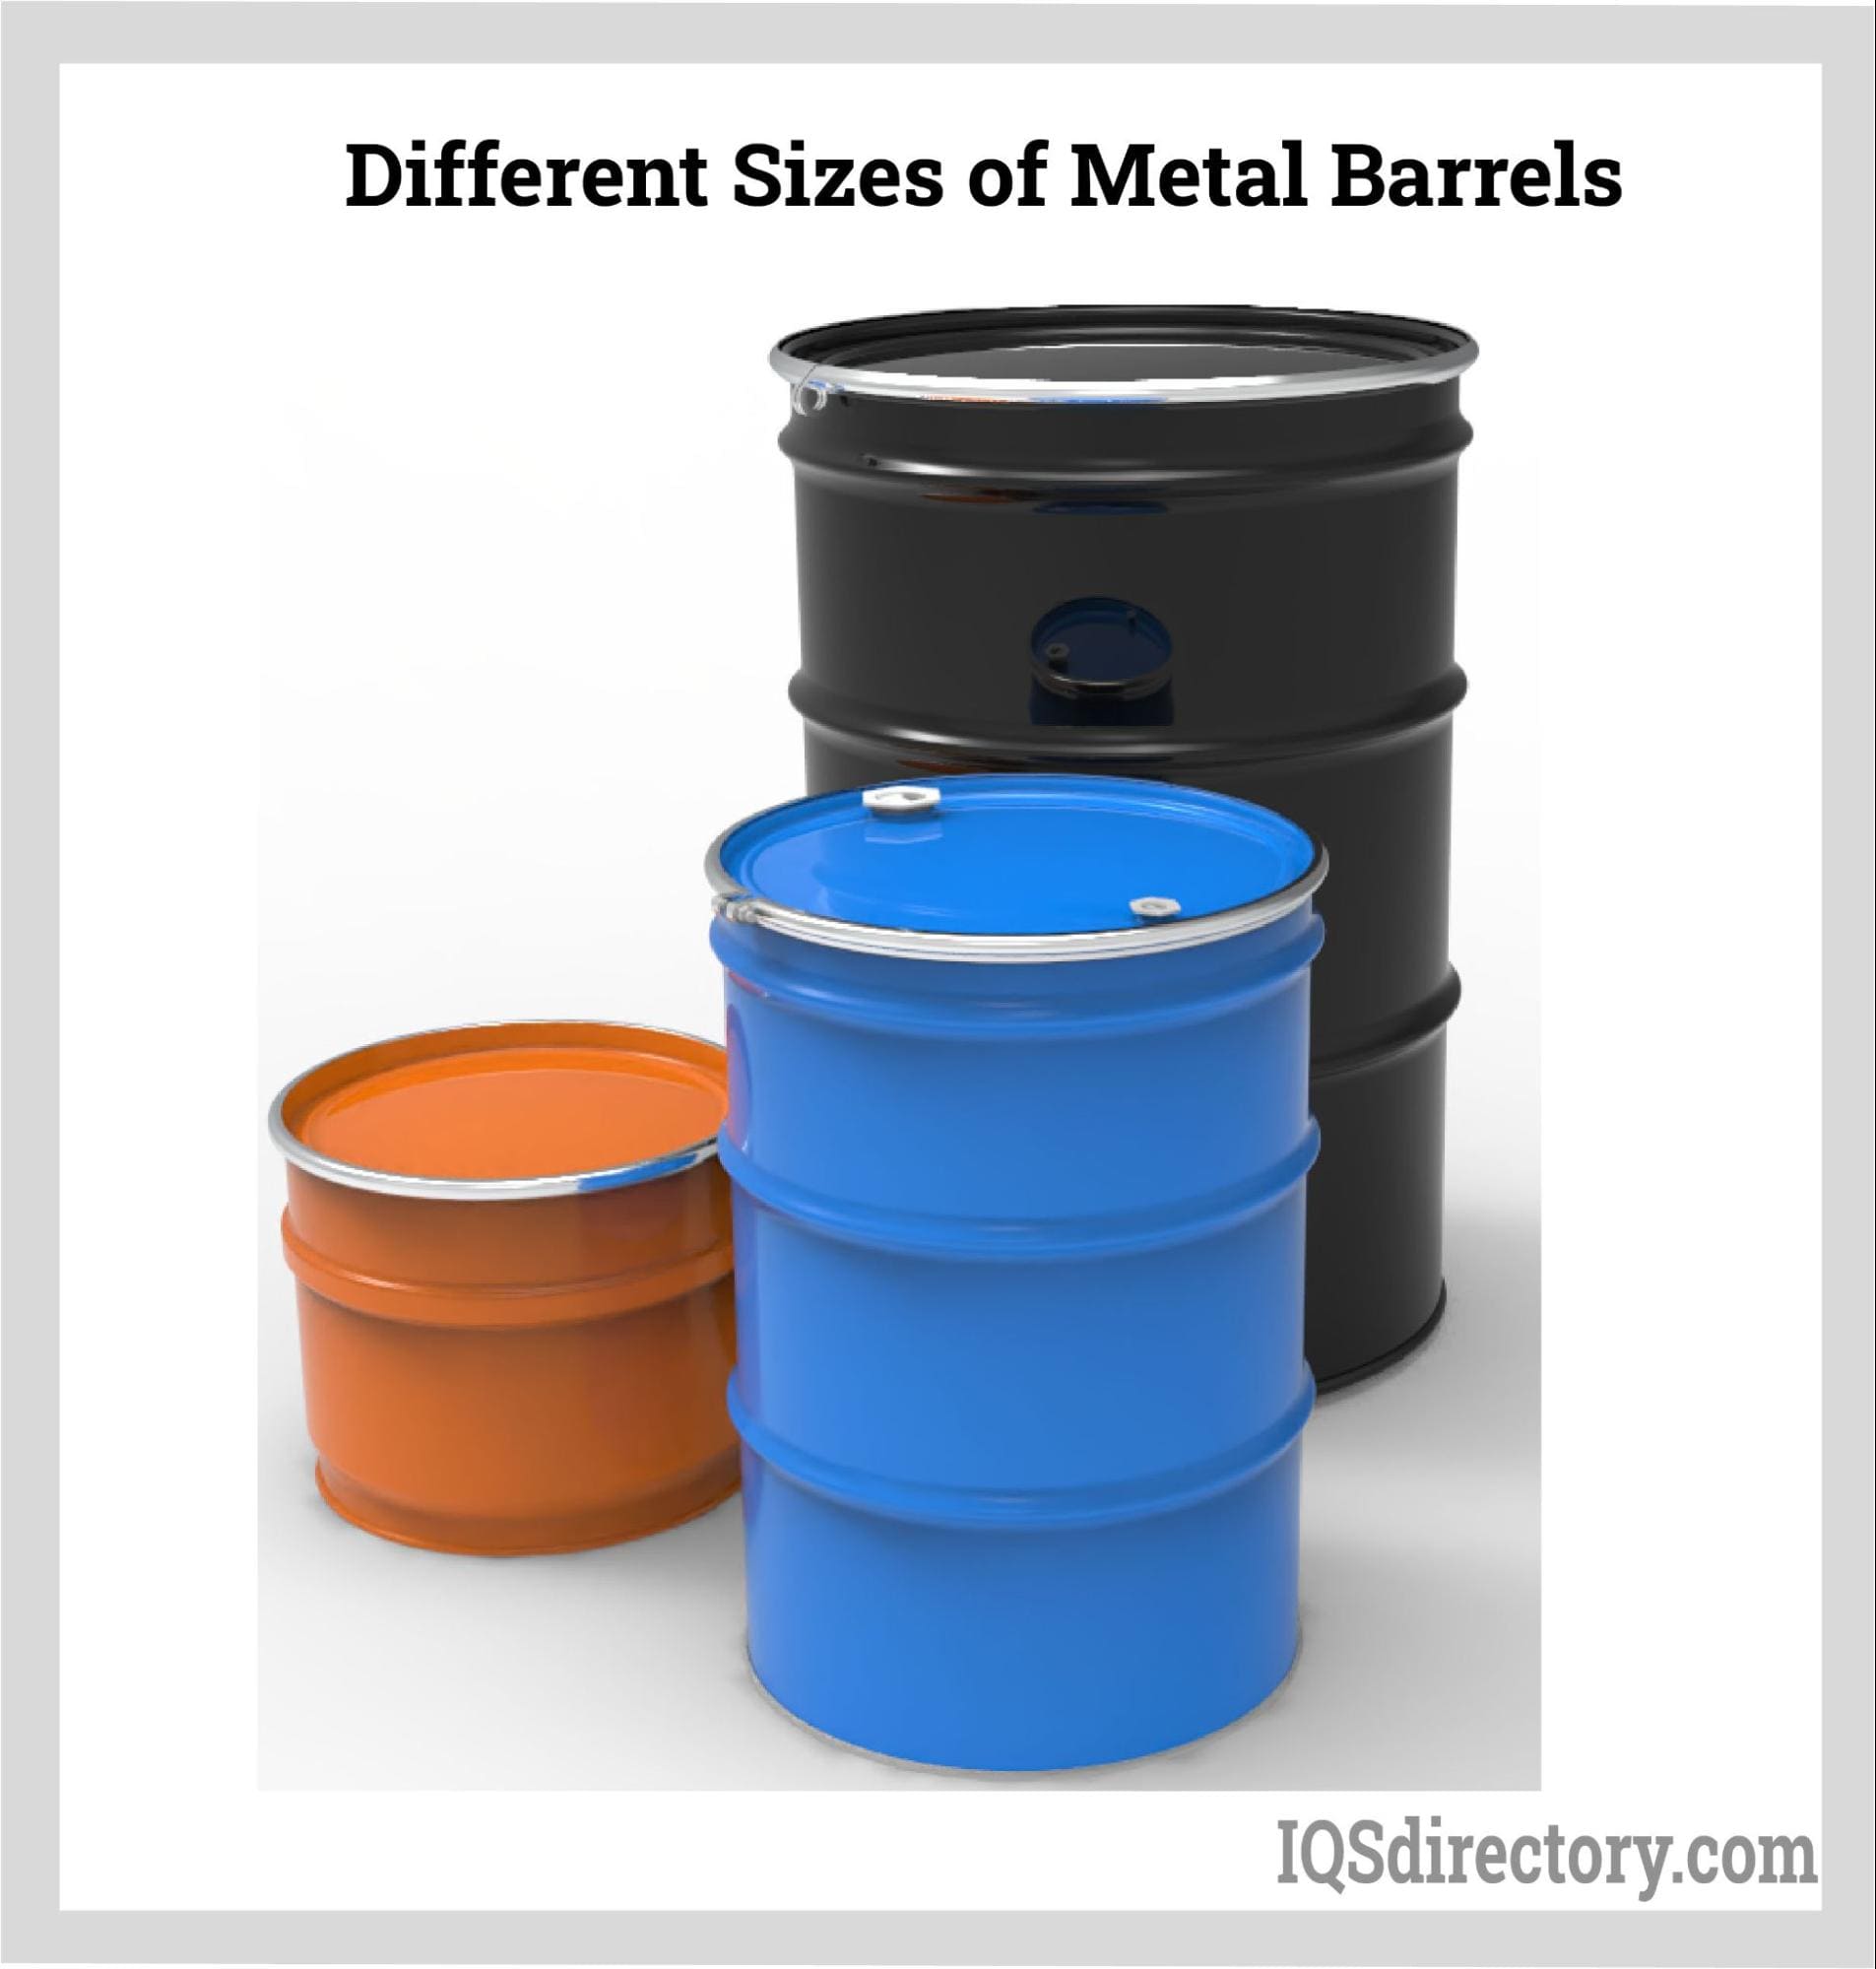 Plastic Barrels: What Is It? How Is It Used? Types,Applications